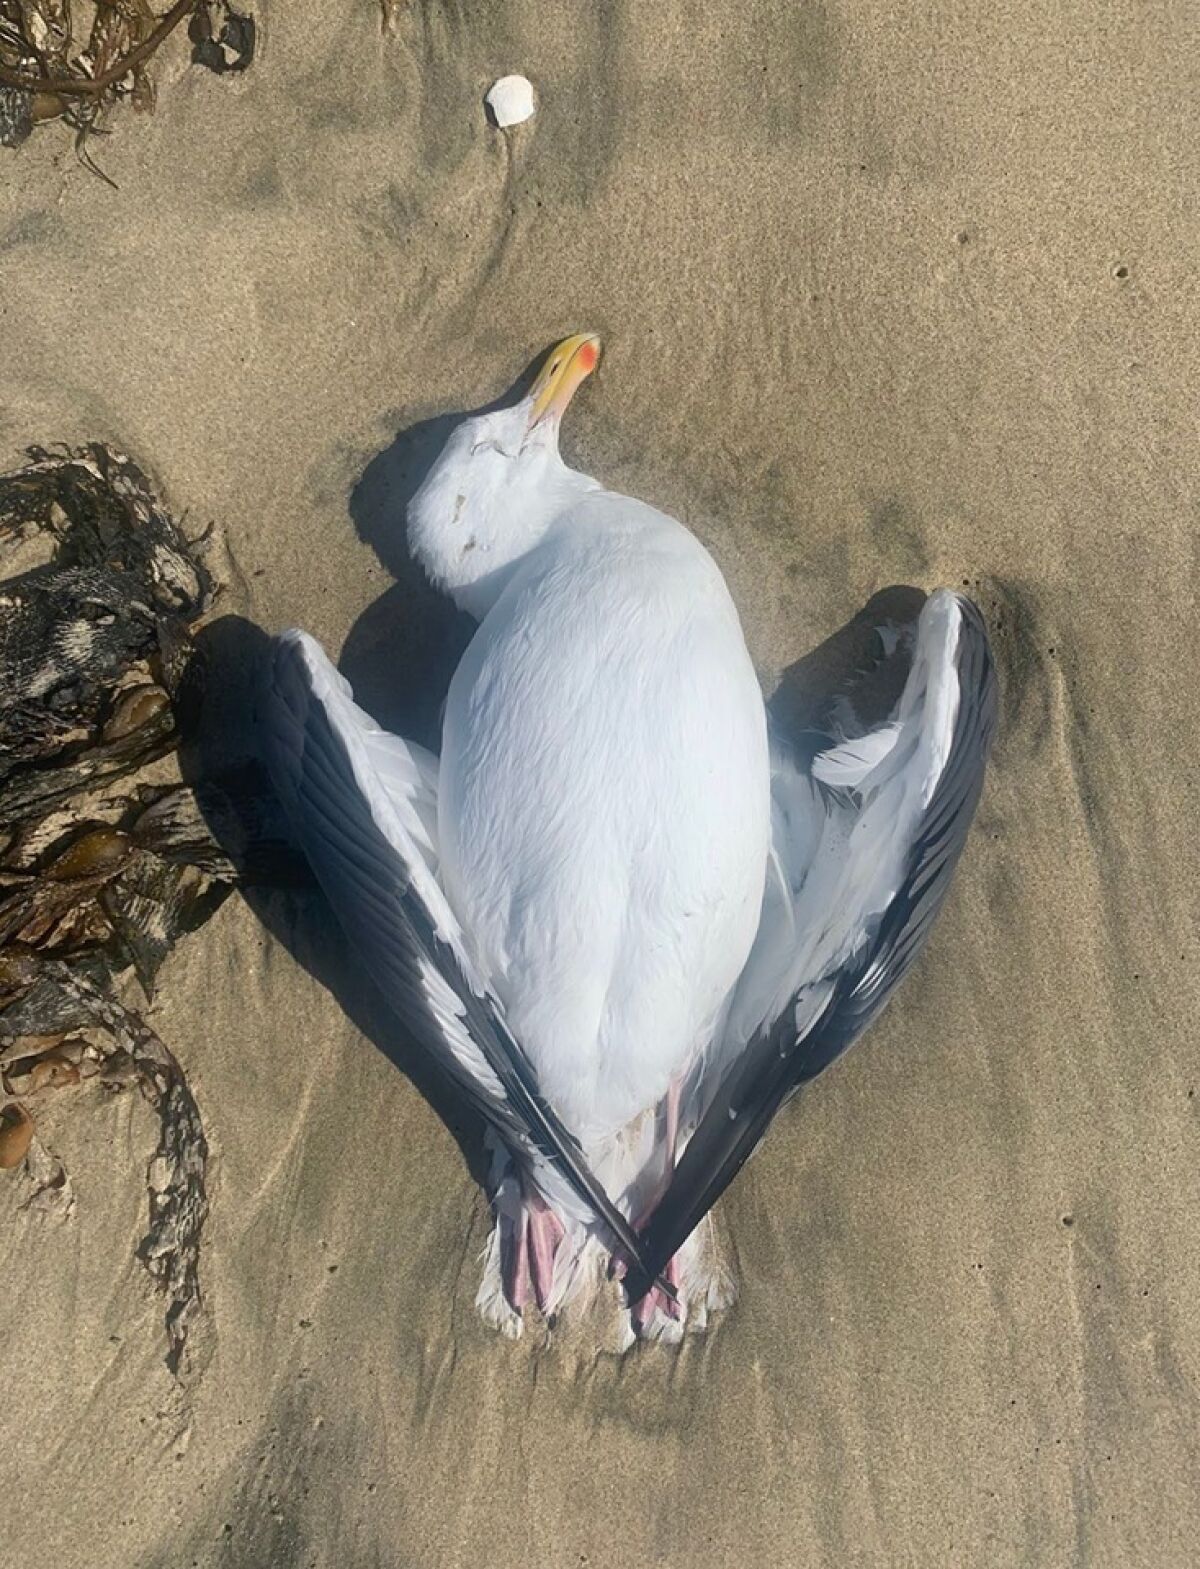 A belly-up sick Western Gull laying on sand next to seaweed.